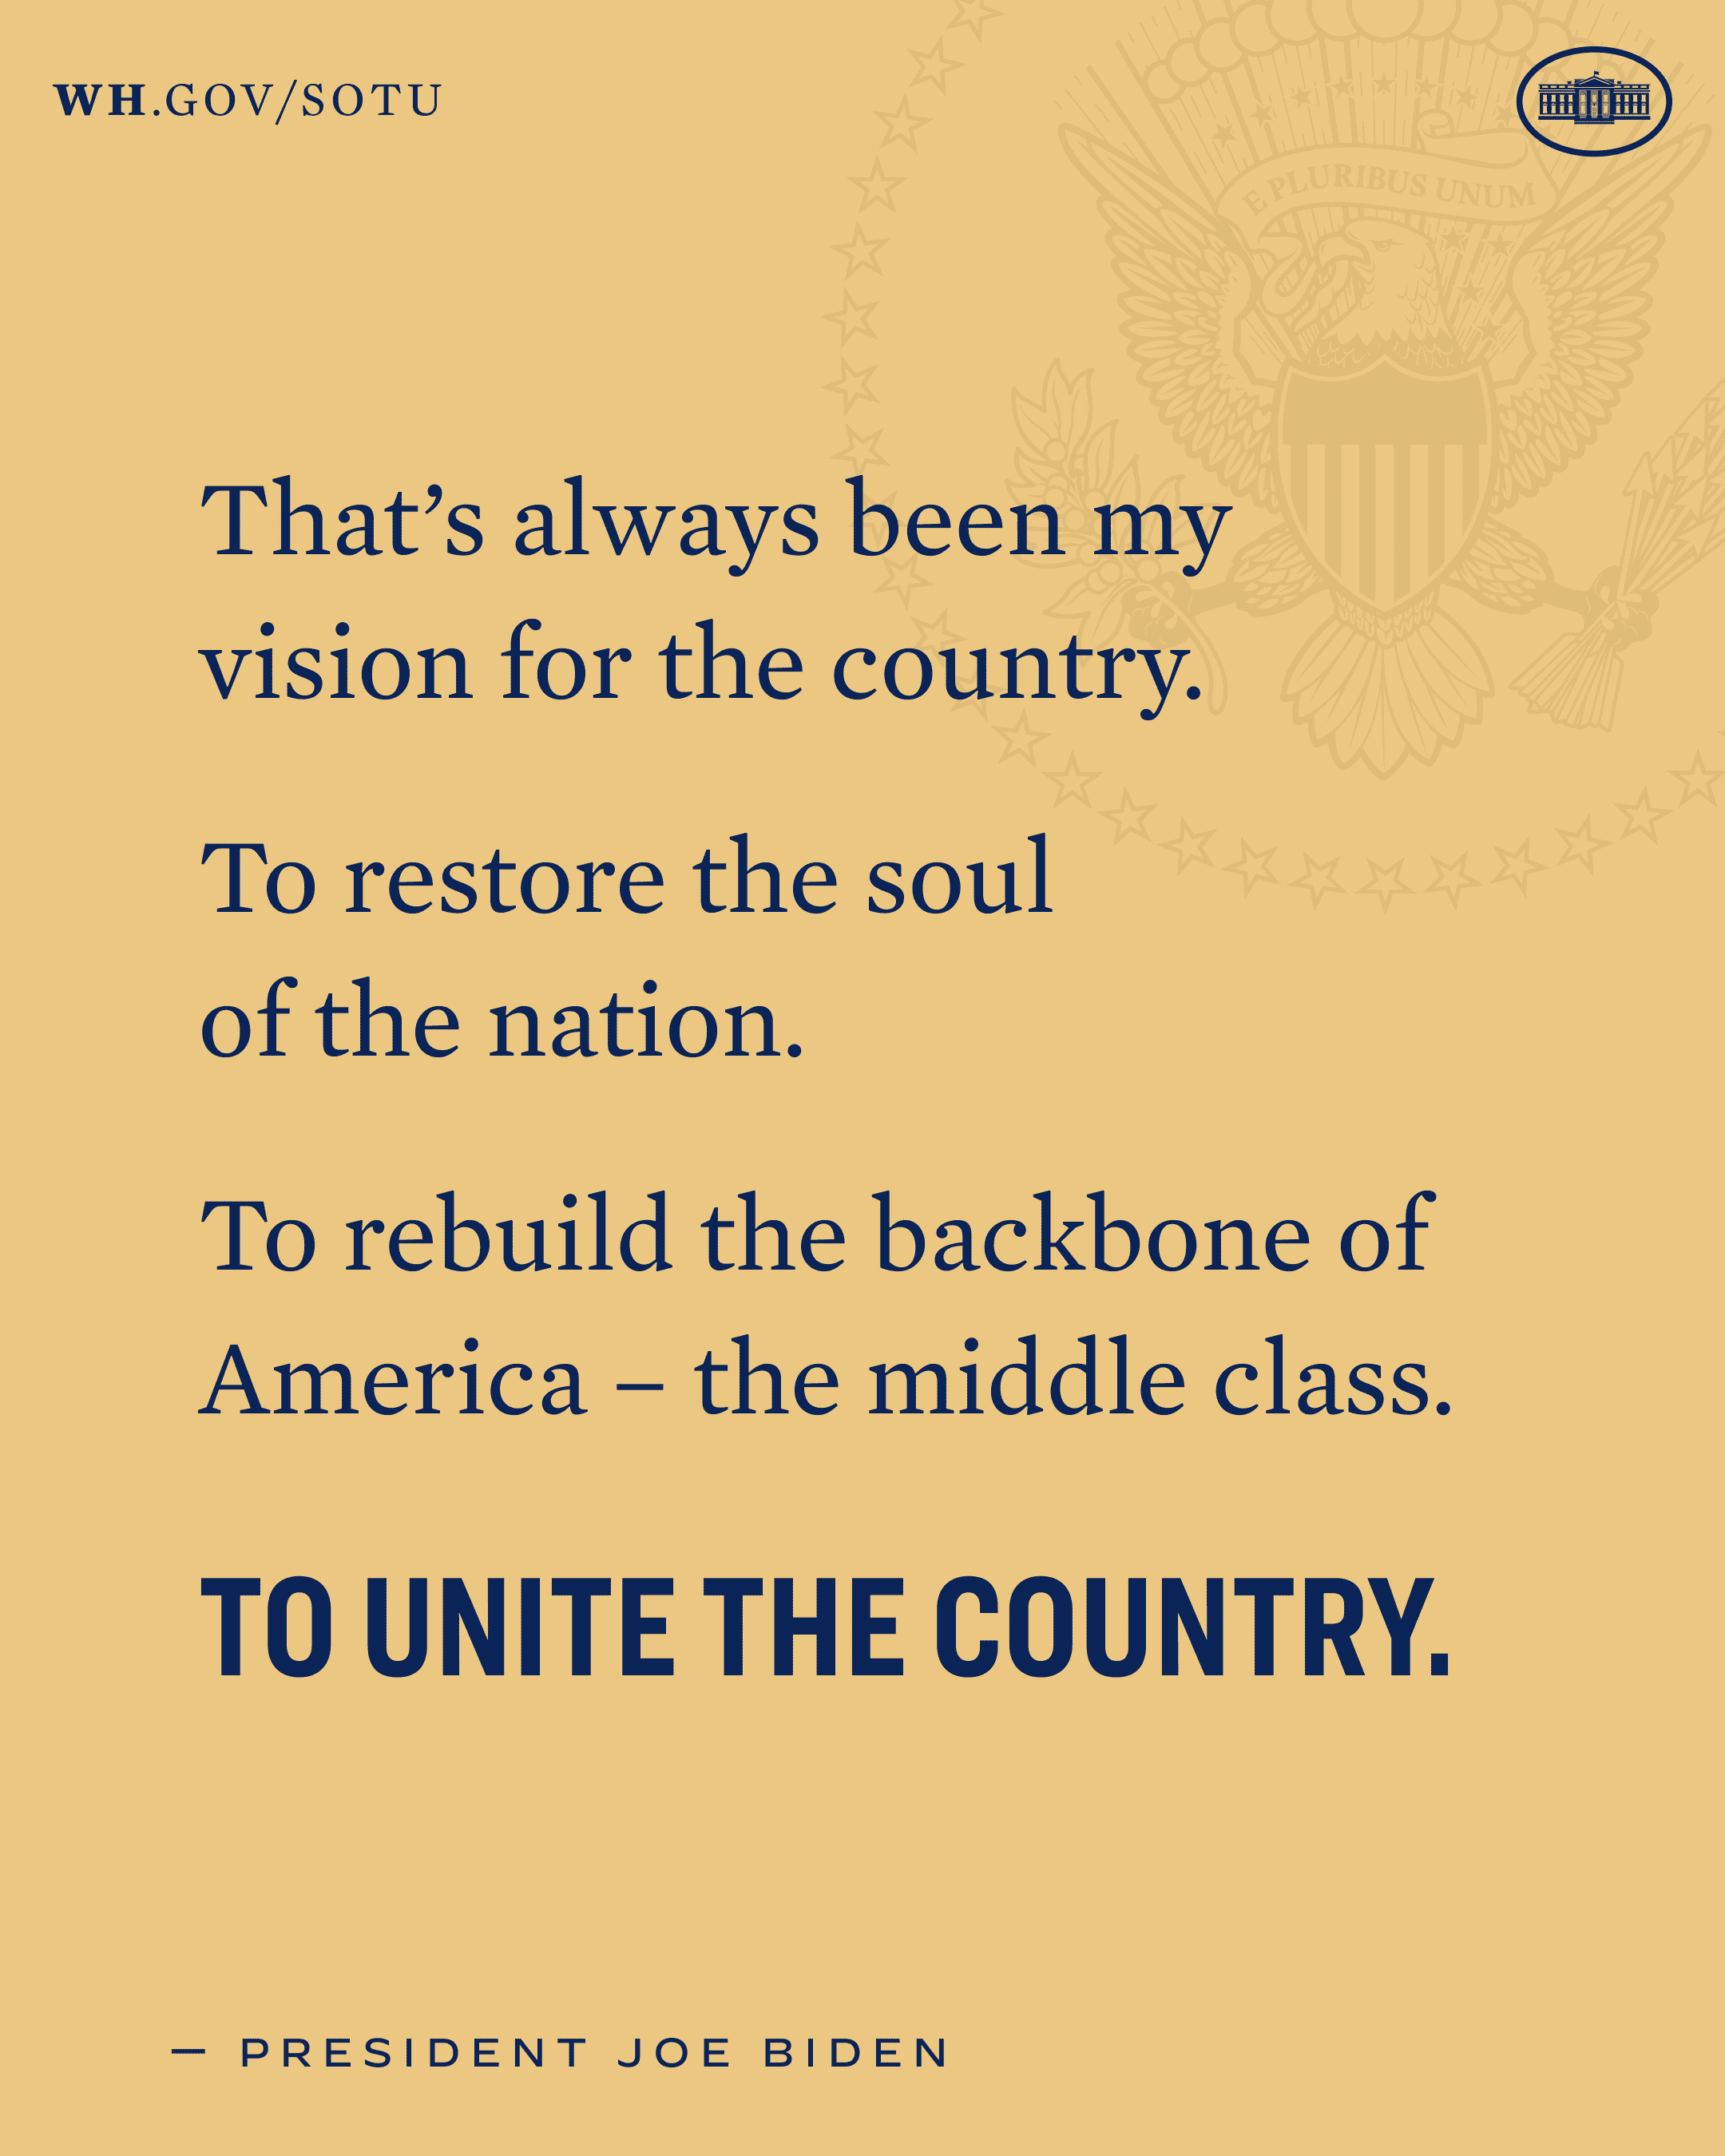 That’s always been my vision for the country. To restore the soul of the nation. To rebuild the backbone of America - the middle class. To unite the country.